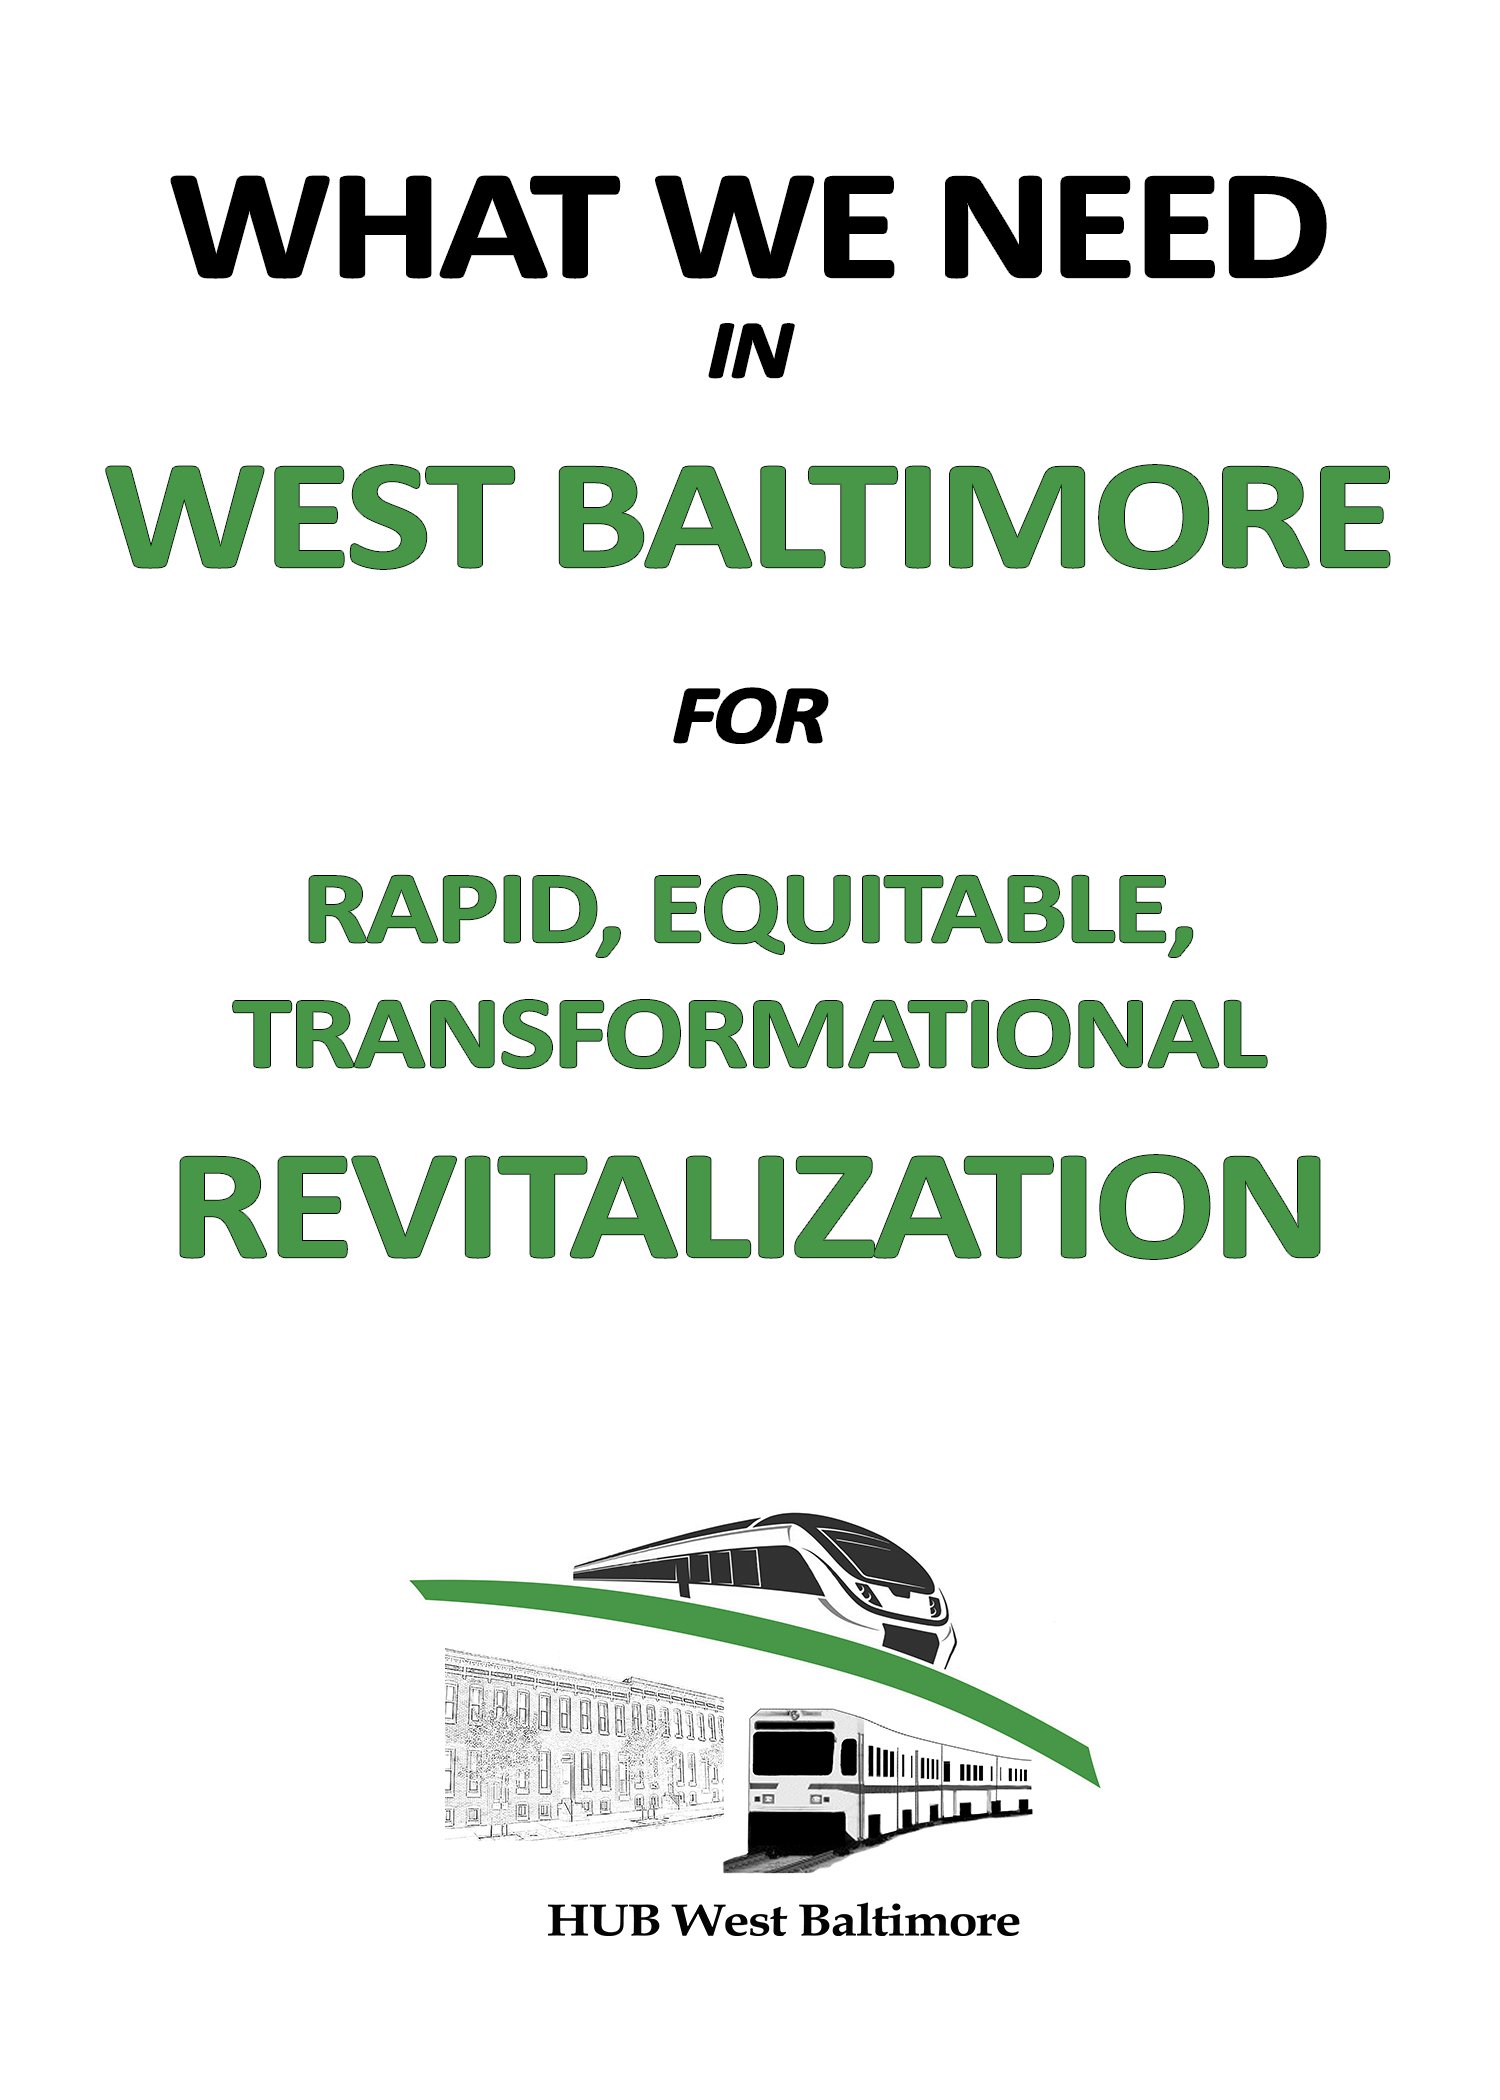 Hub West Baltimore - What We Need Flyer - Front Page.jpg